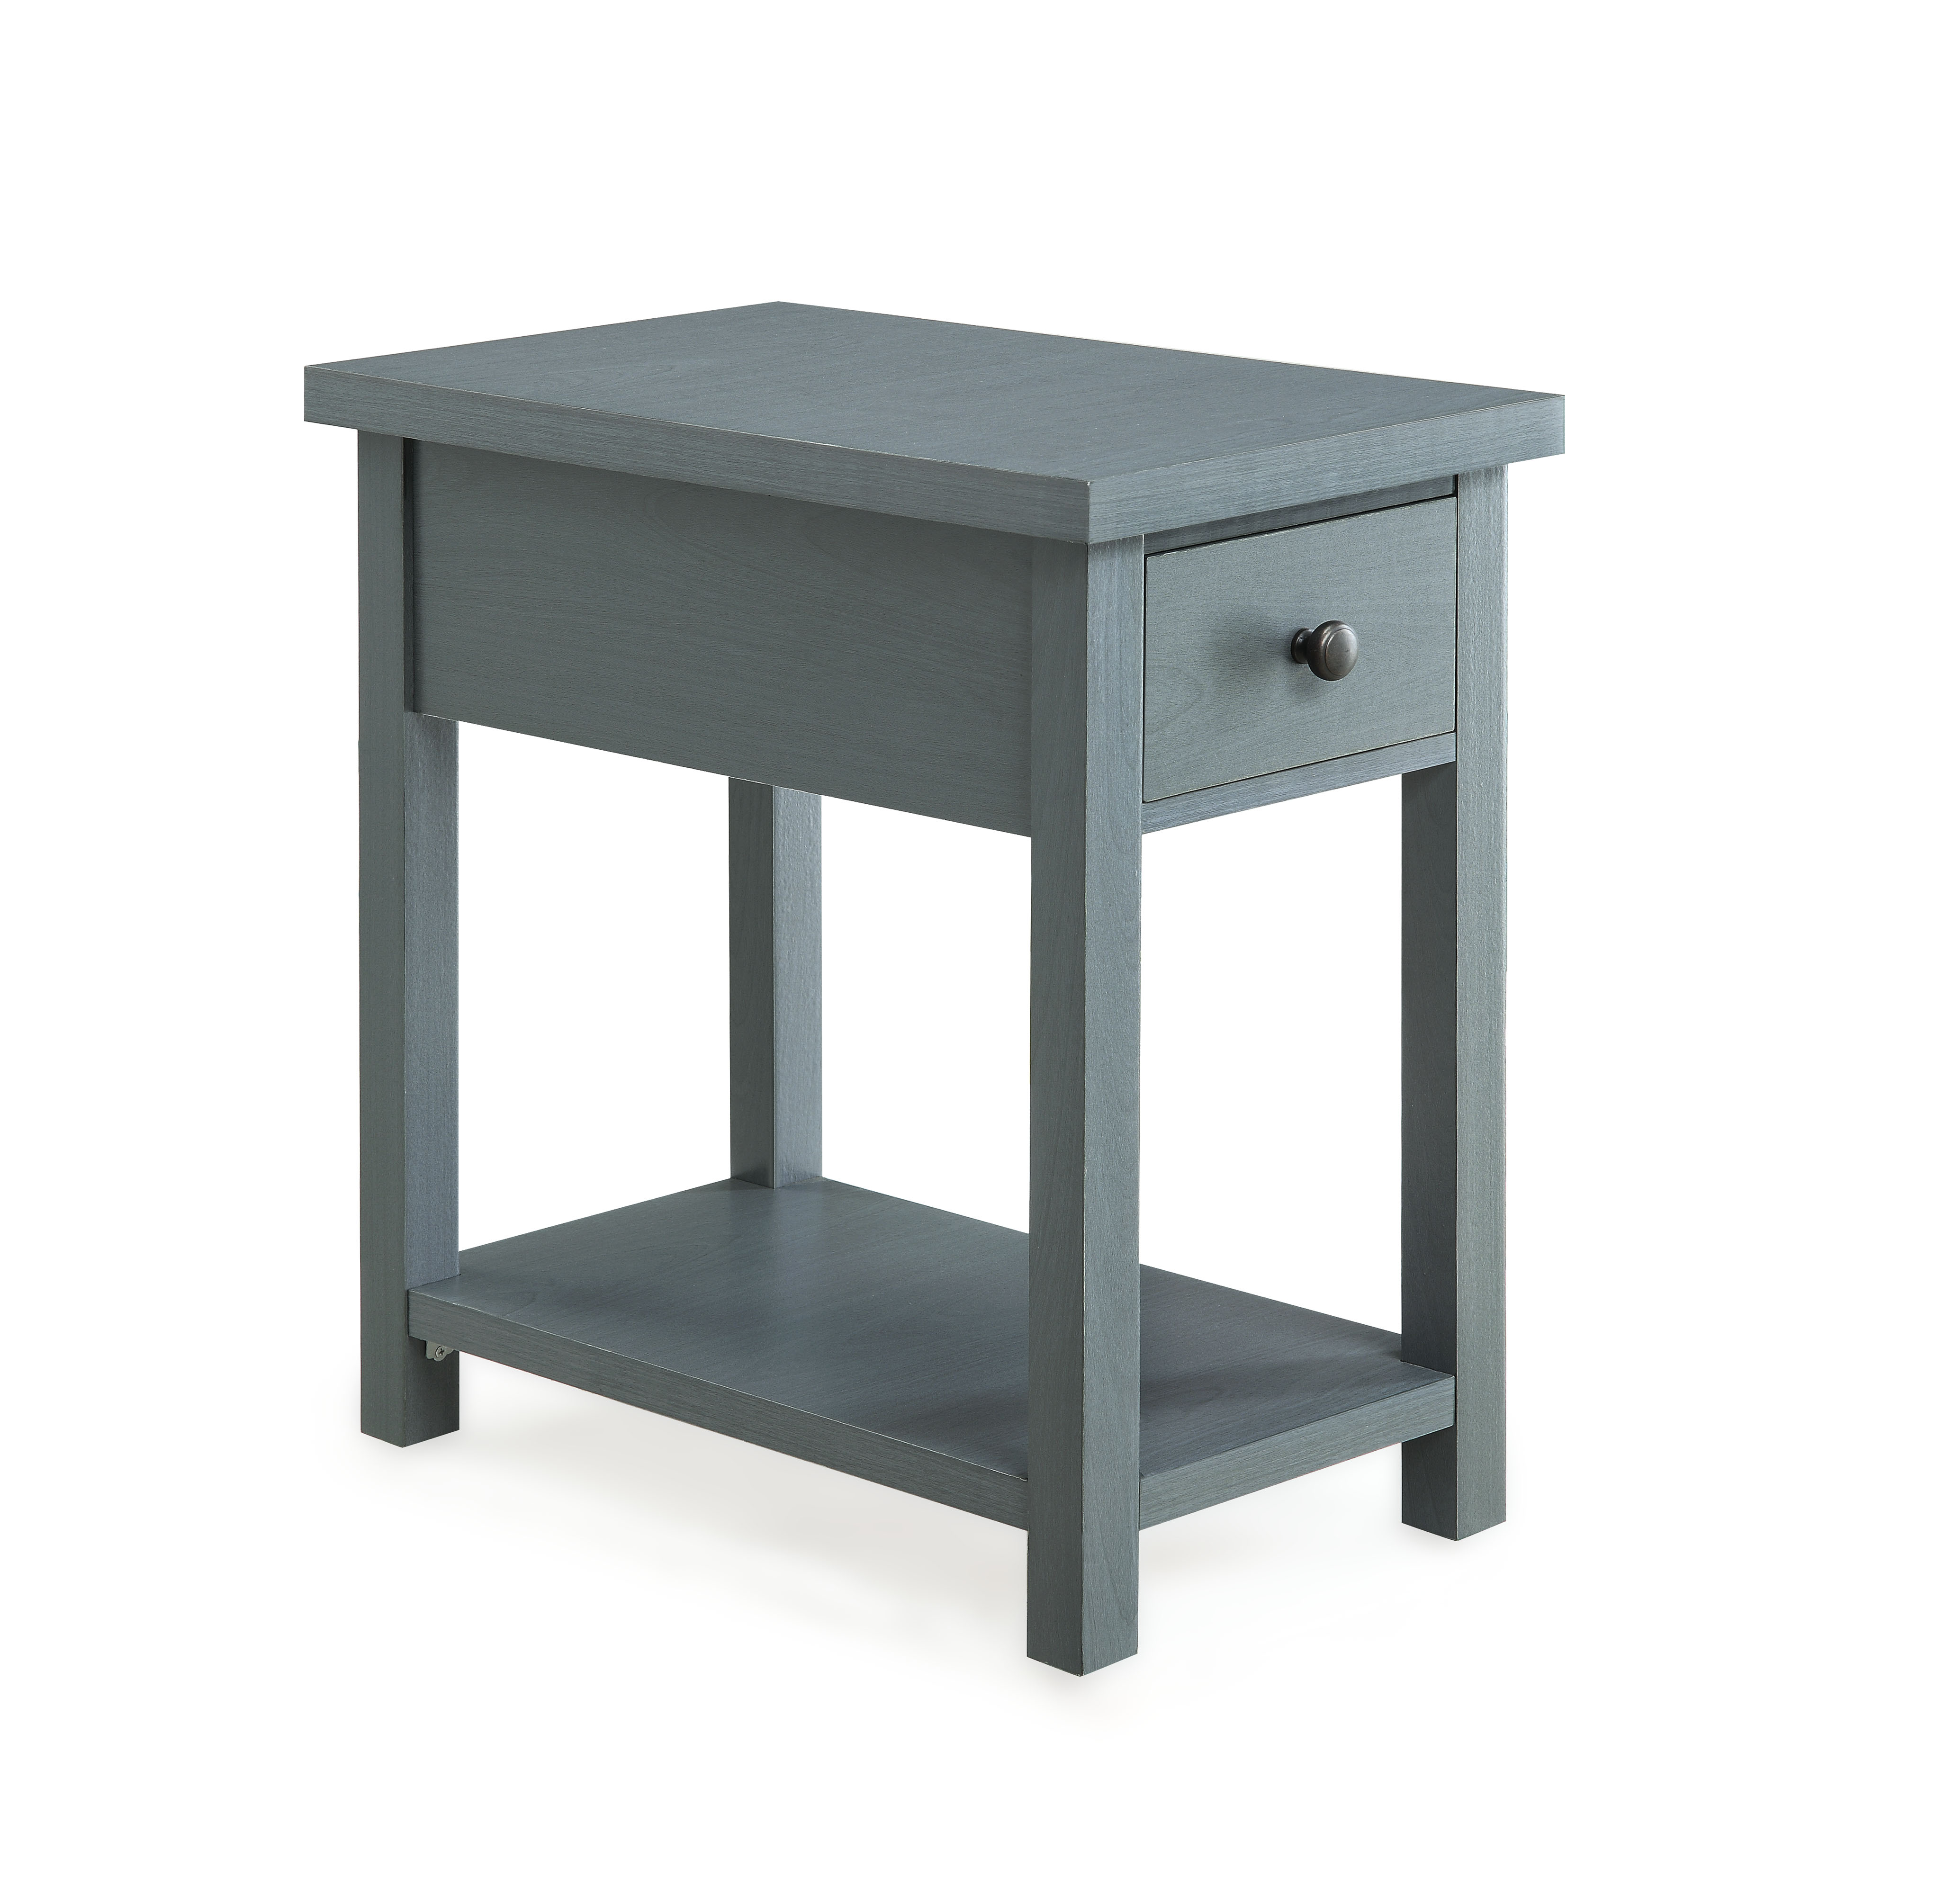 small decorative end tables the outrageous cool black and oak better homes gardens oxford square table with drawer available blue red white wash farmhouse decor whole solid walnut